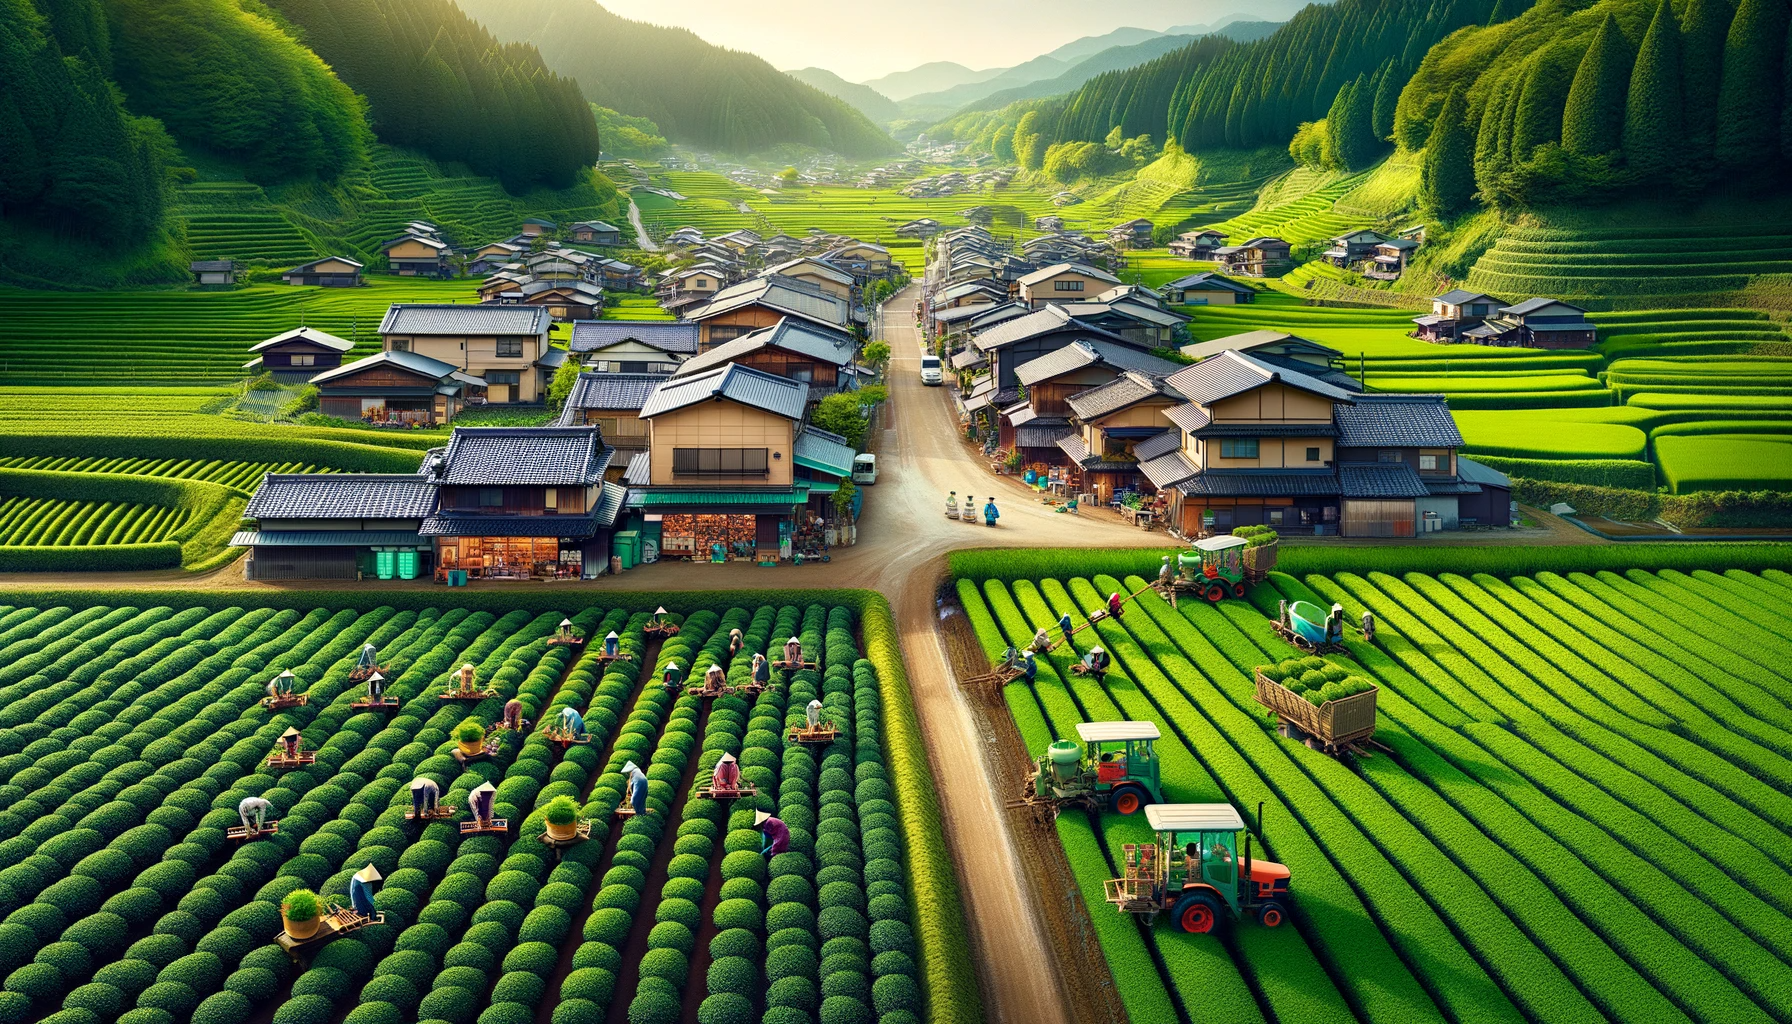 Japanese village with tea fields. Left shows farmers using traditional methods for organic cultivation; right has machinery for conventional methods